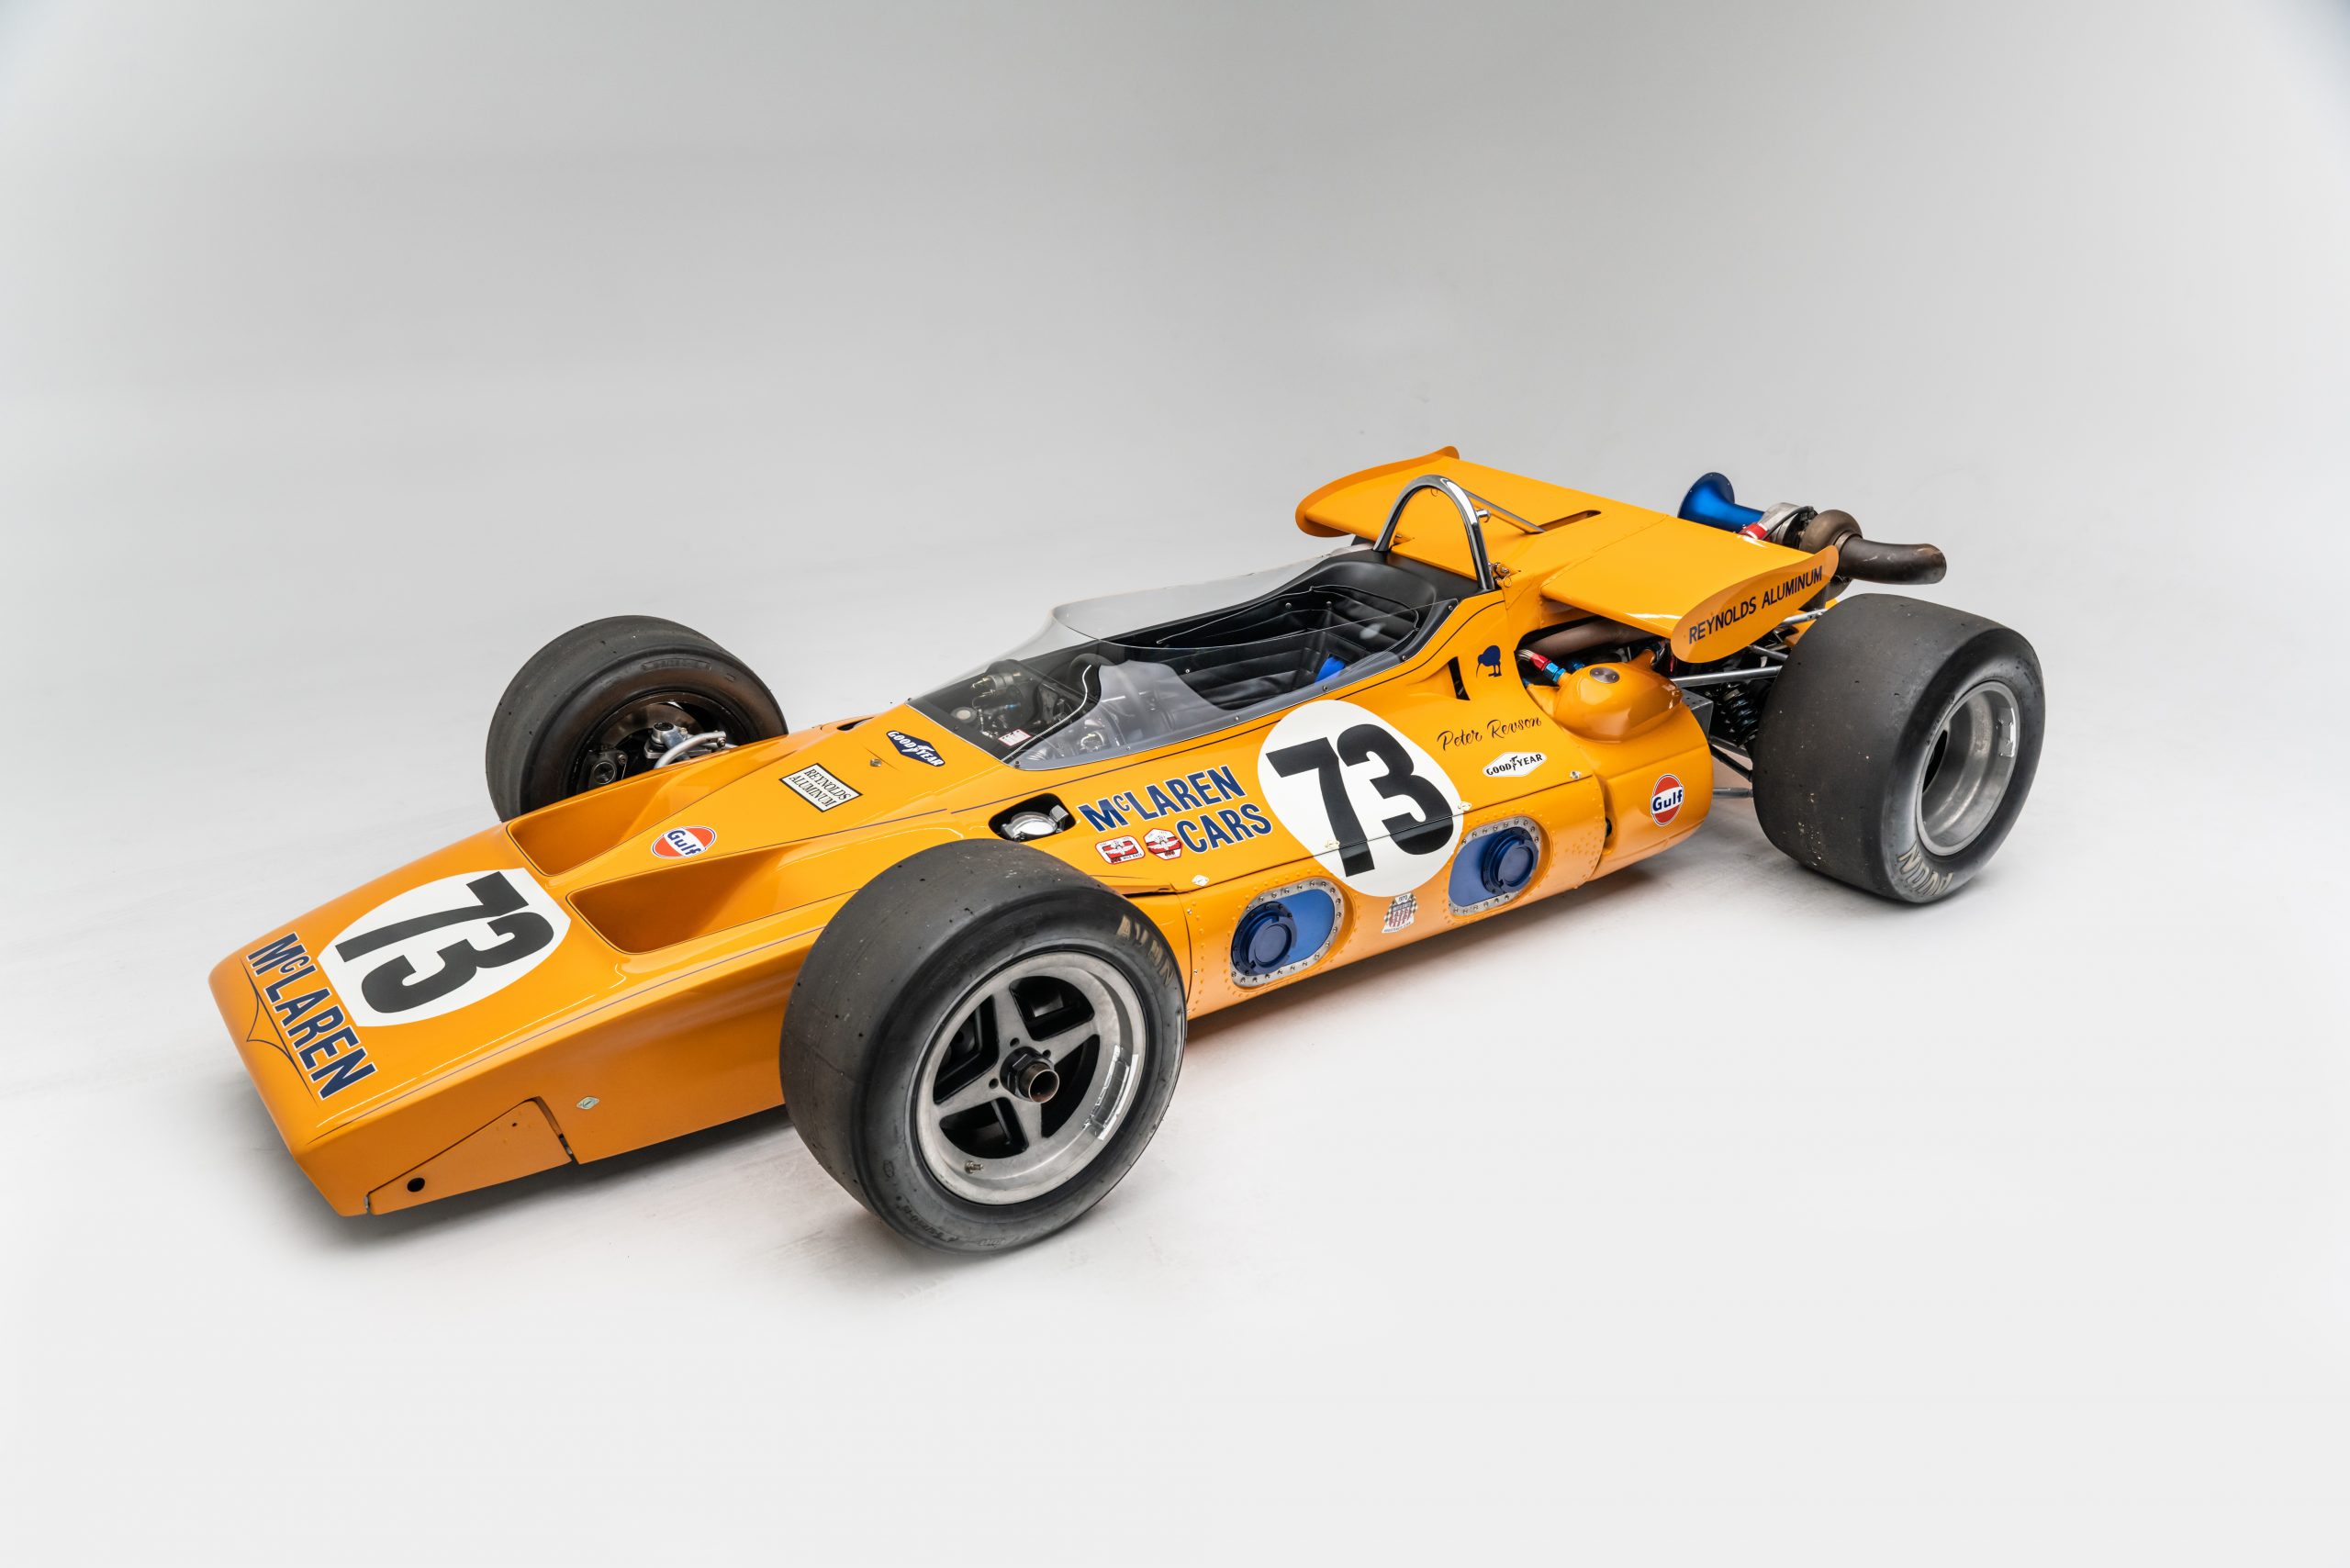 Mythical McLaren cars go on display at Petersen Museum - Magneto